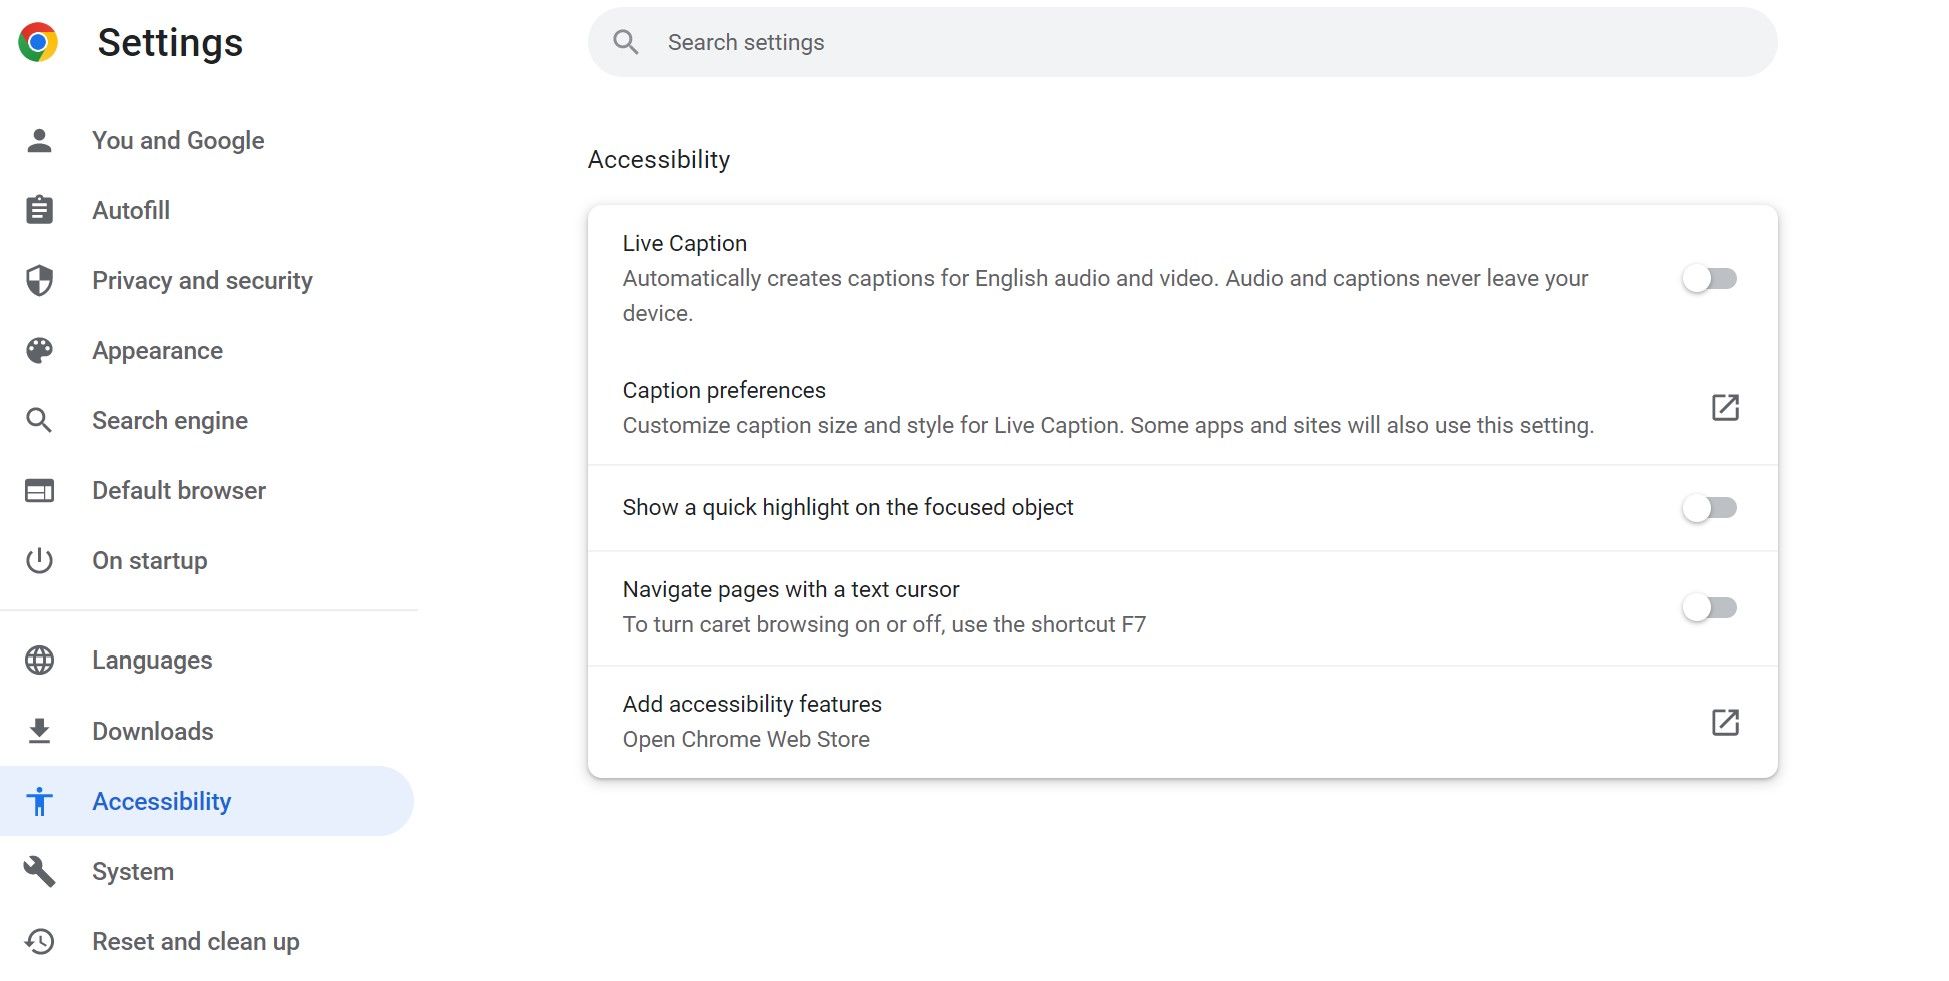 Disabling Live Caption Feature in Google Chrome's Settings